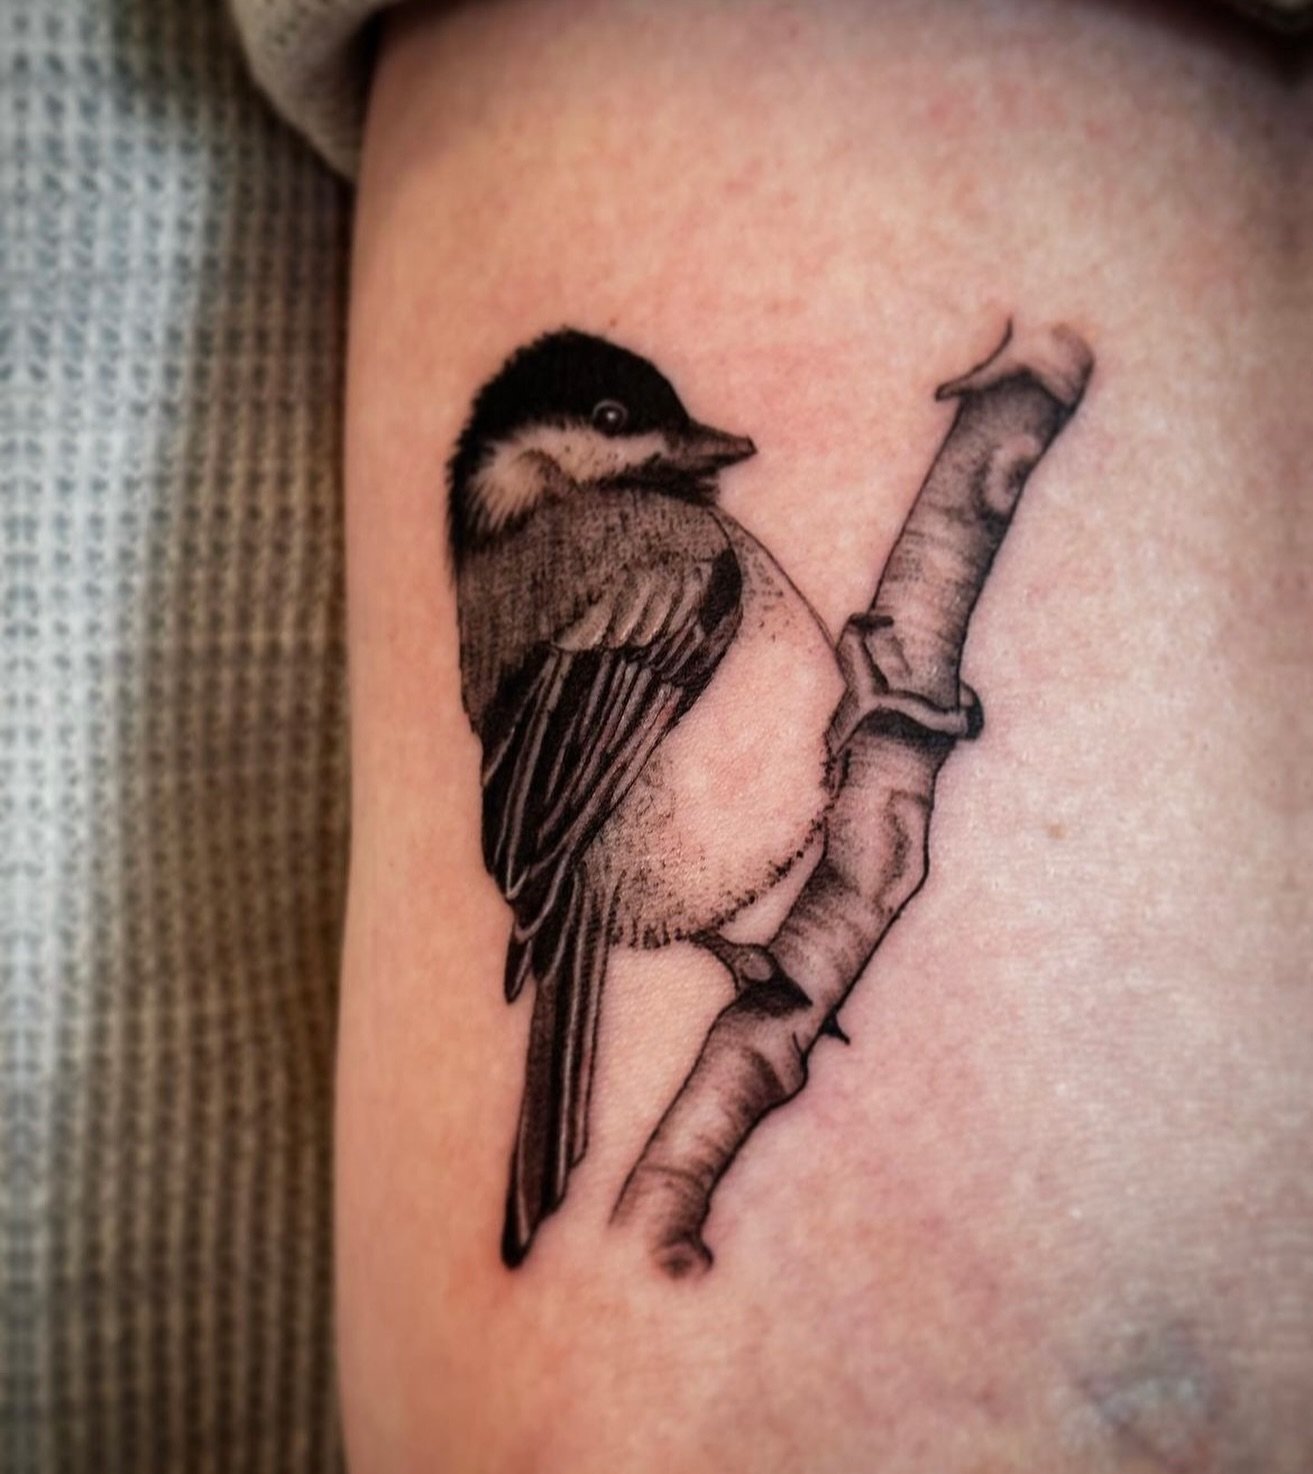 How cute is this little chickadee for a walk in day! By tattoo artist Sarah @saraitattoo 

And just in time to welcome Spring! Sarah will be tattooing at our Flash Event &amp; Fundraiser this Saturday April 20th and she also takes walk in&rsquo;s eve